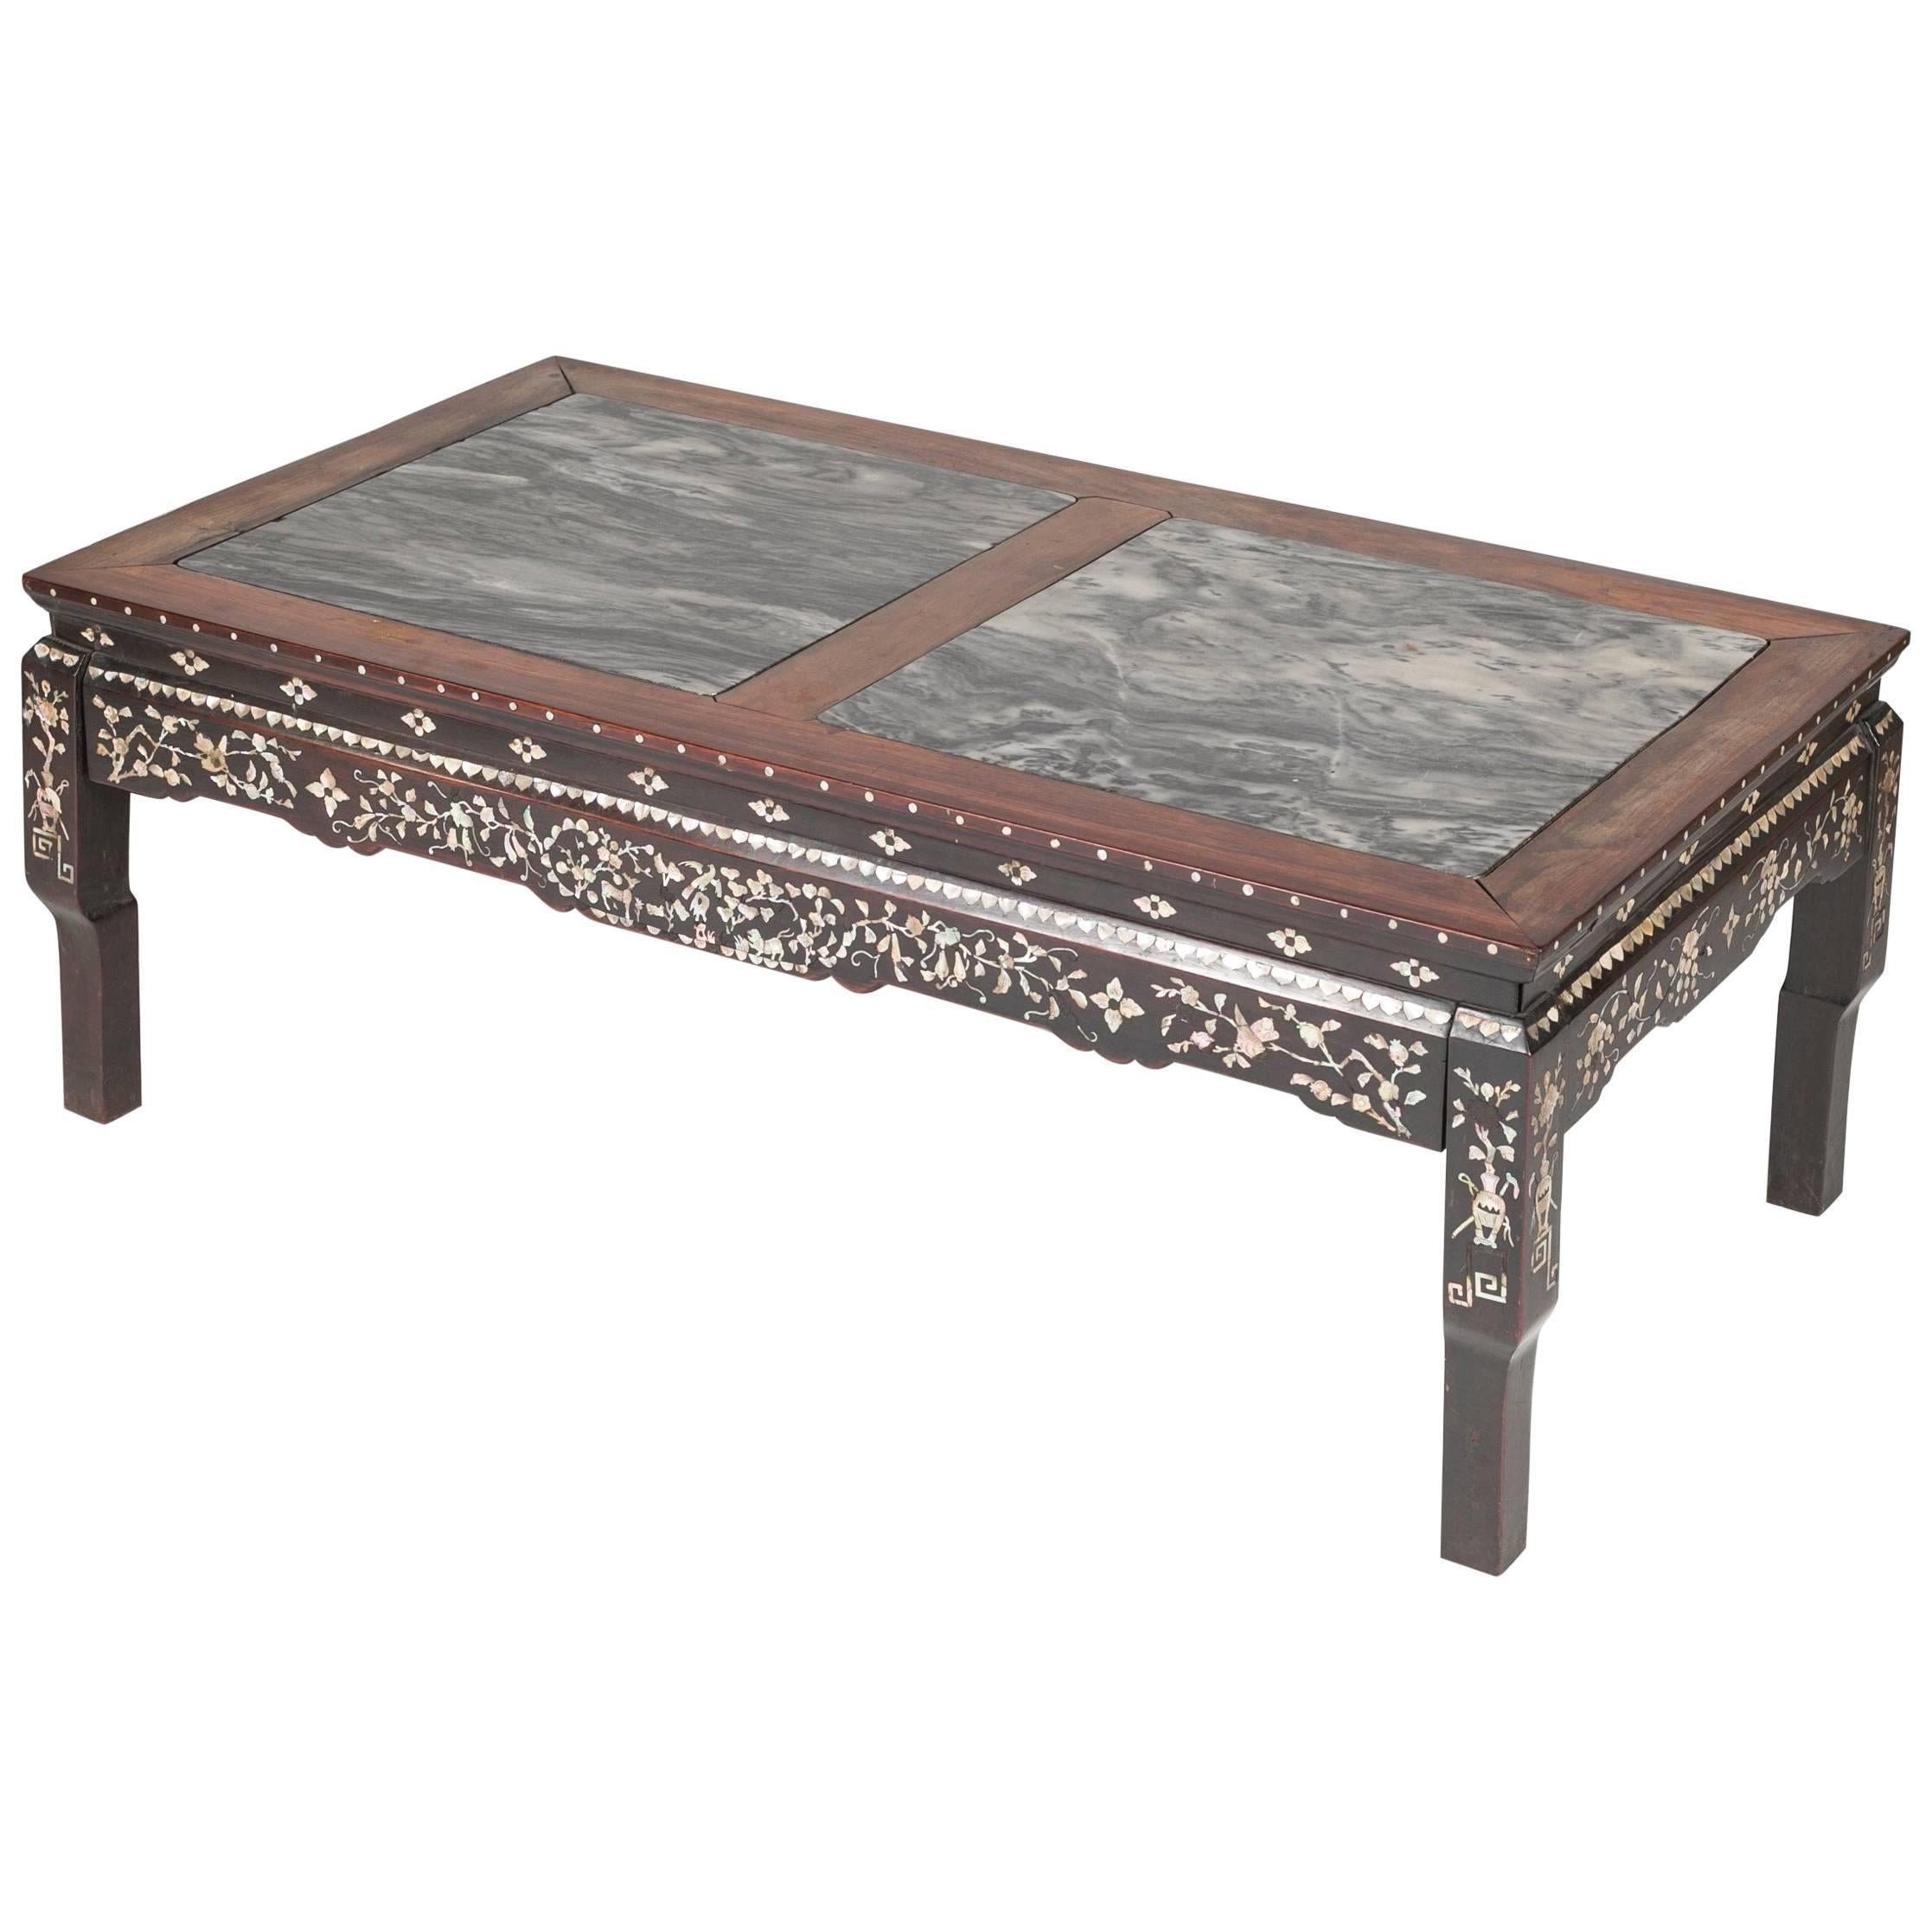 19th Century Chinese Low Table with Marble Tops